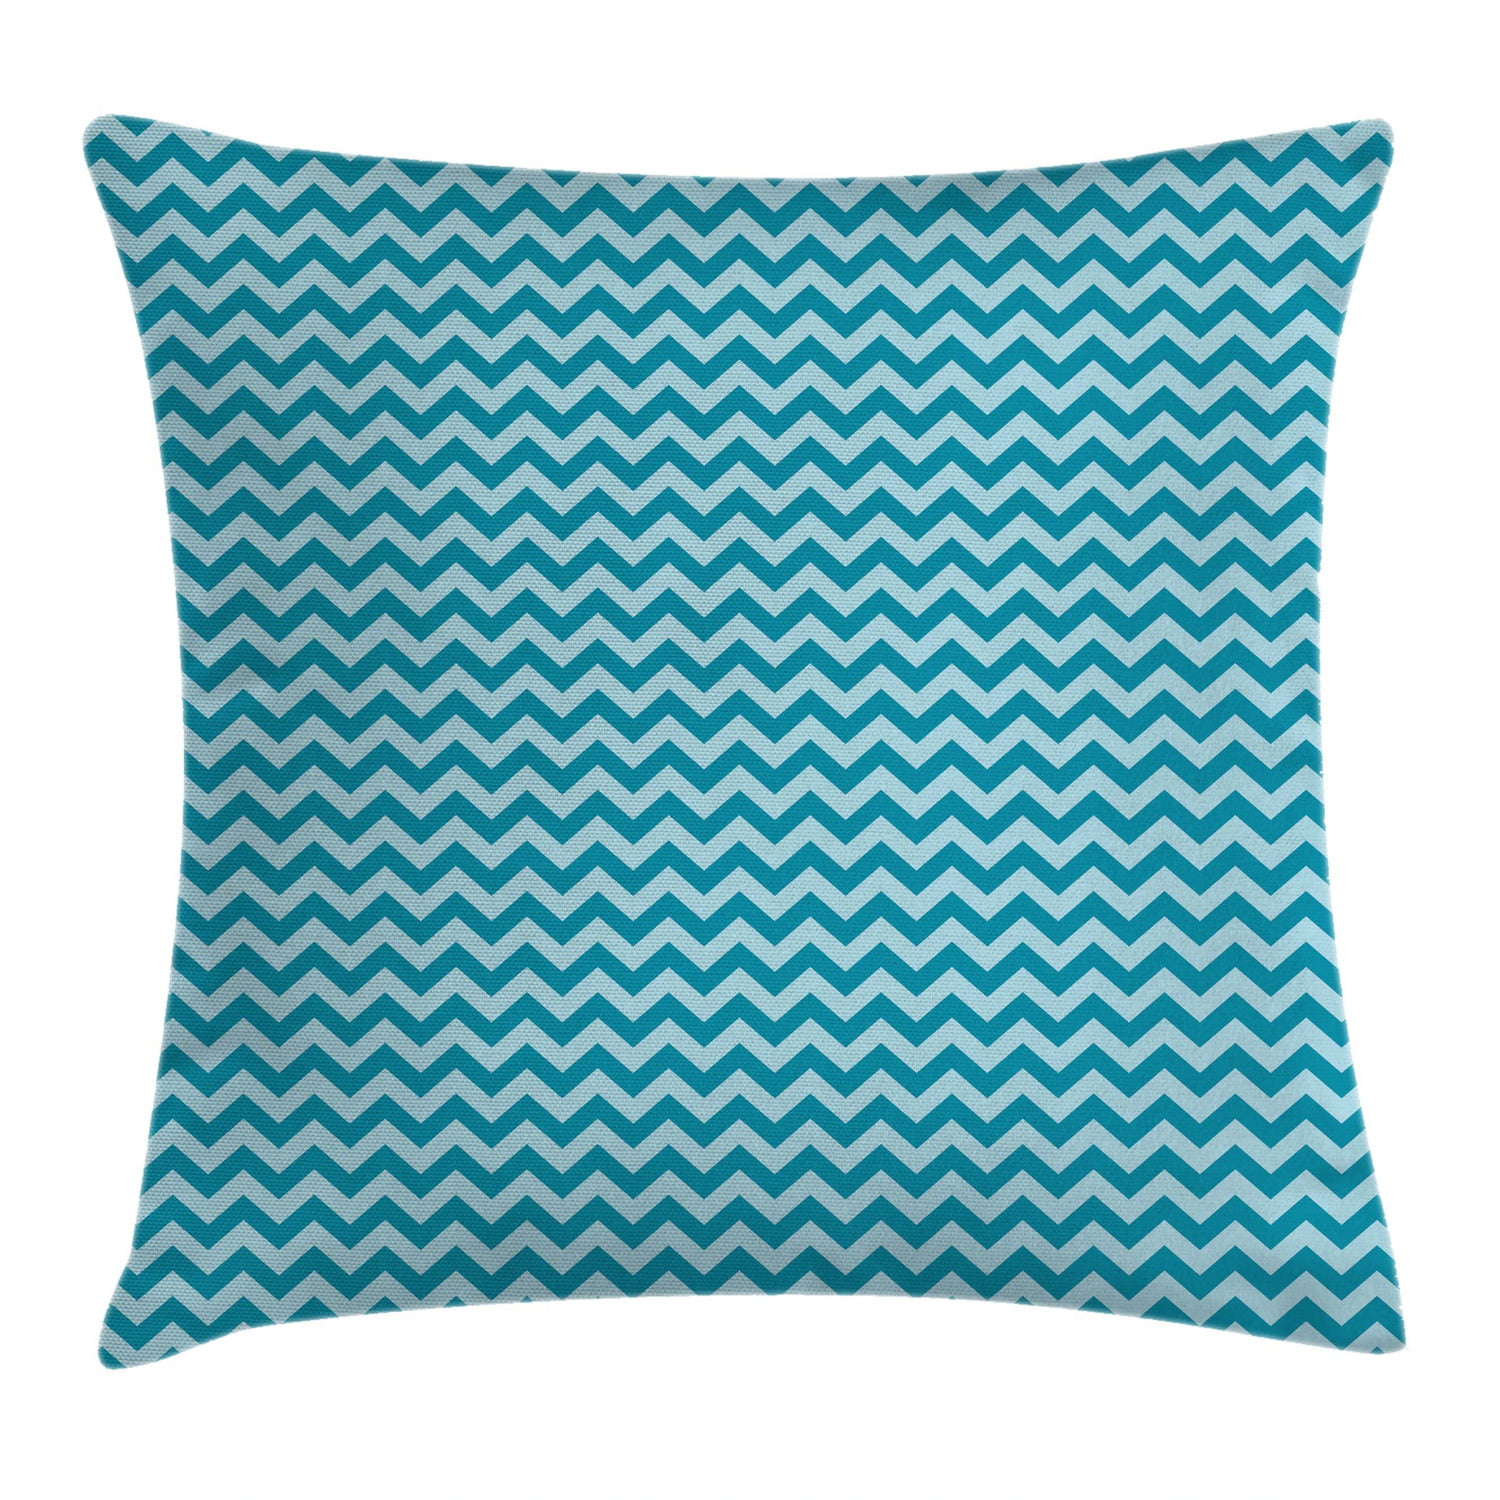 Decorative Square Accent Pillow Case 24 X 24 Ocean Blue Colored Zig Zag Line Wave Like Image Print Ambesonne Aqua Throw Pillow Cushion Cover Pale Blue Navy Blue and Seafoam 